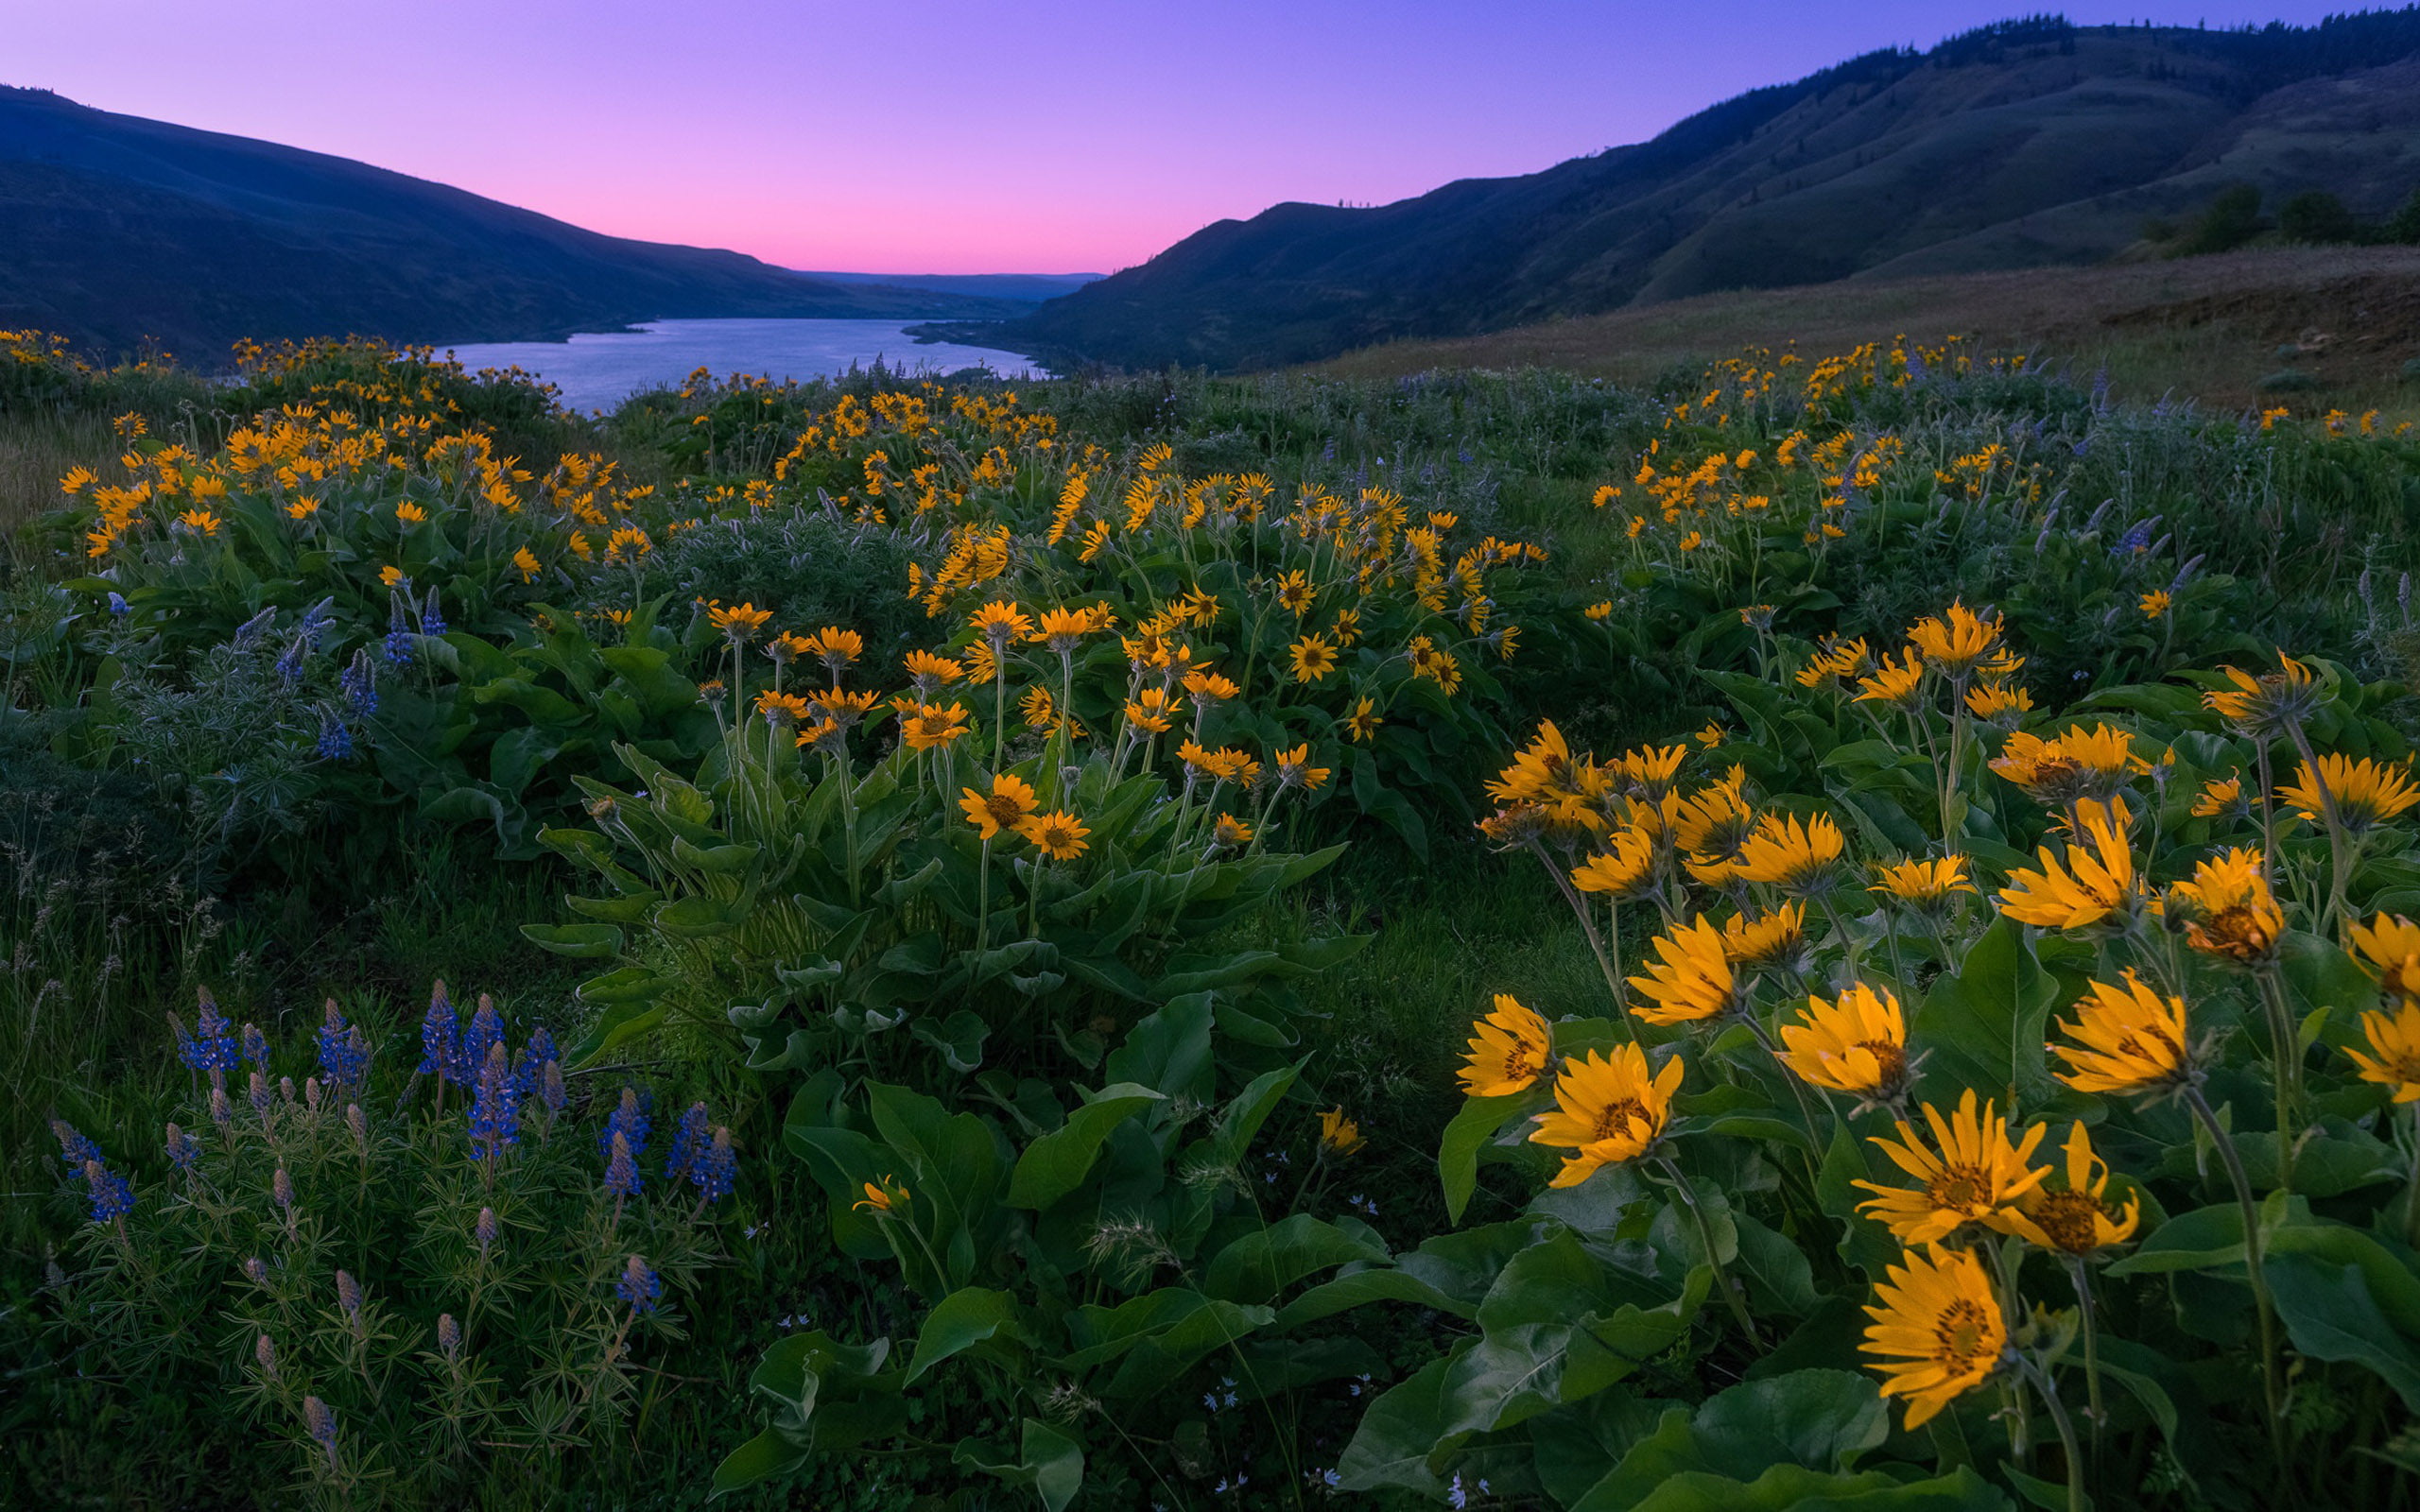 Columbia River And North America Sunset Spring Yellow And Blue Wild Flowers Mountains Landscape Wallpaper For Desktop 2560×1600